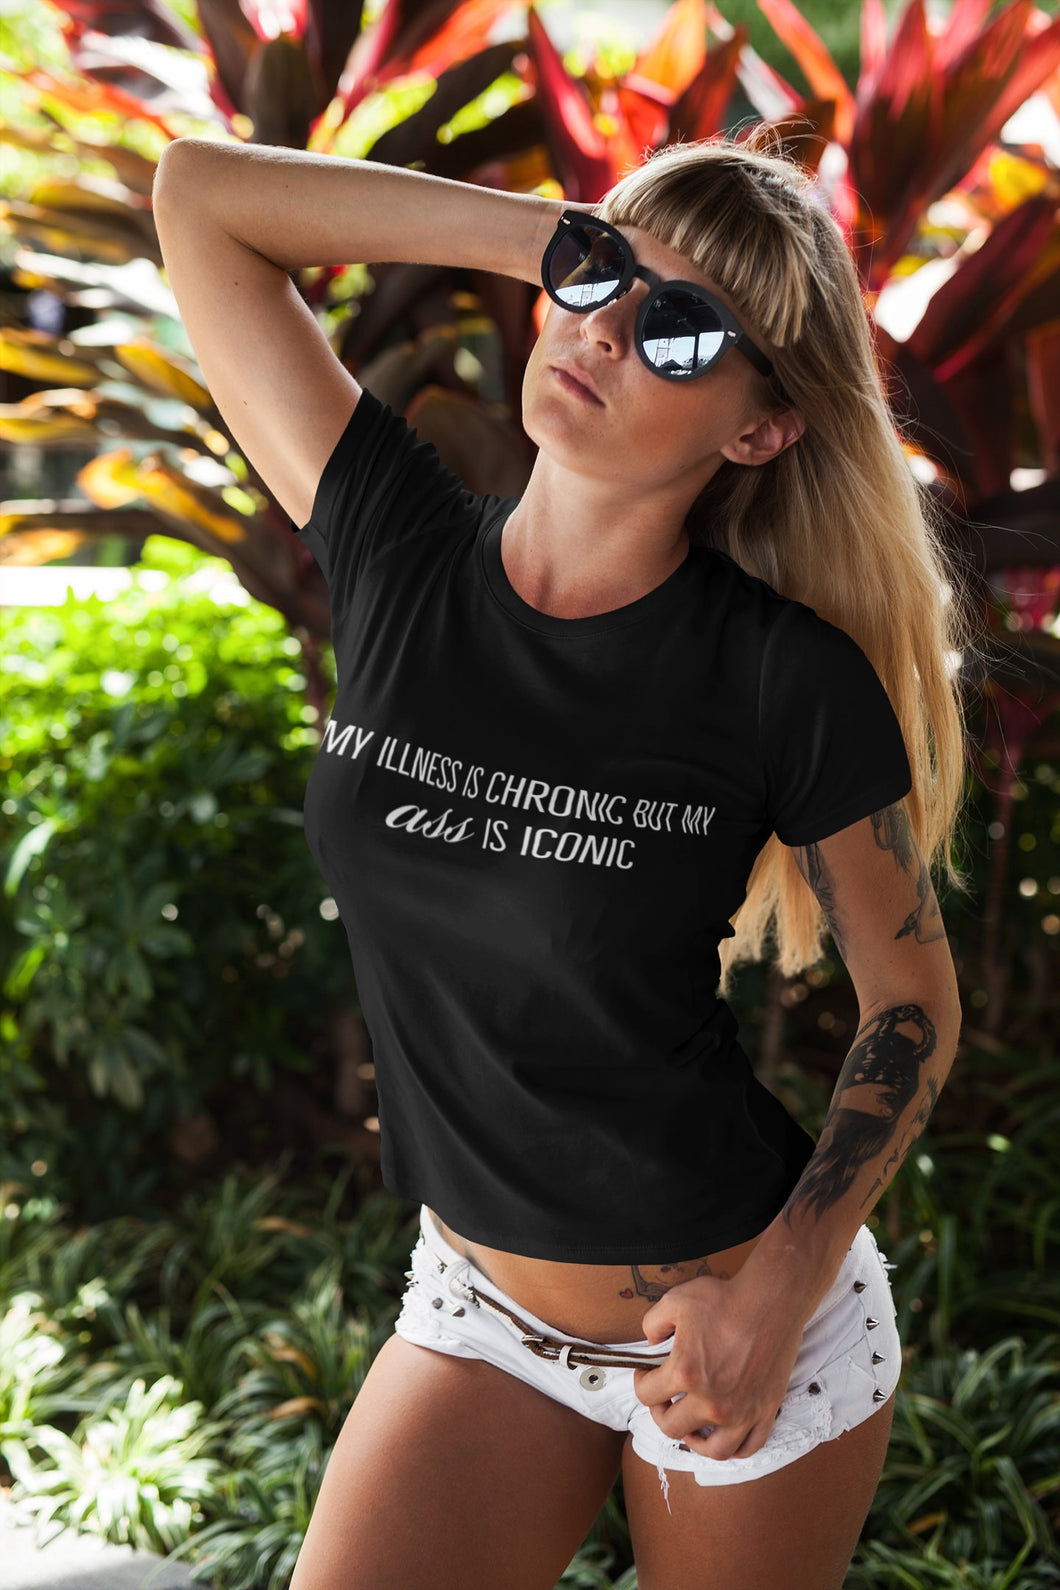 My illness is chronic but my ass is iconic - Unisex Tee